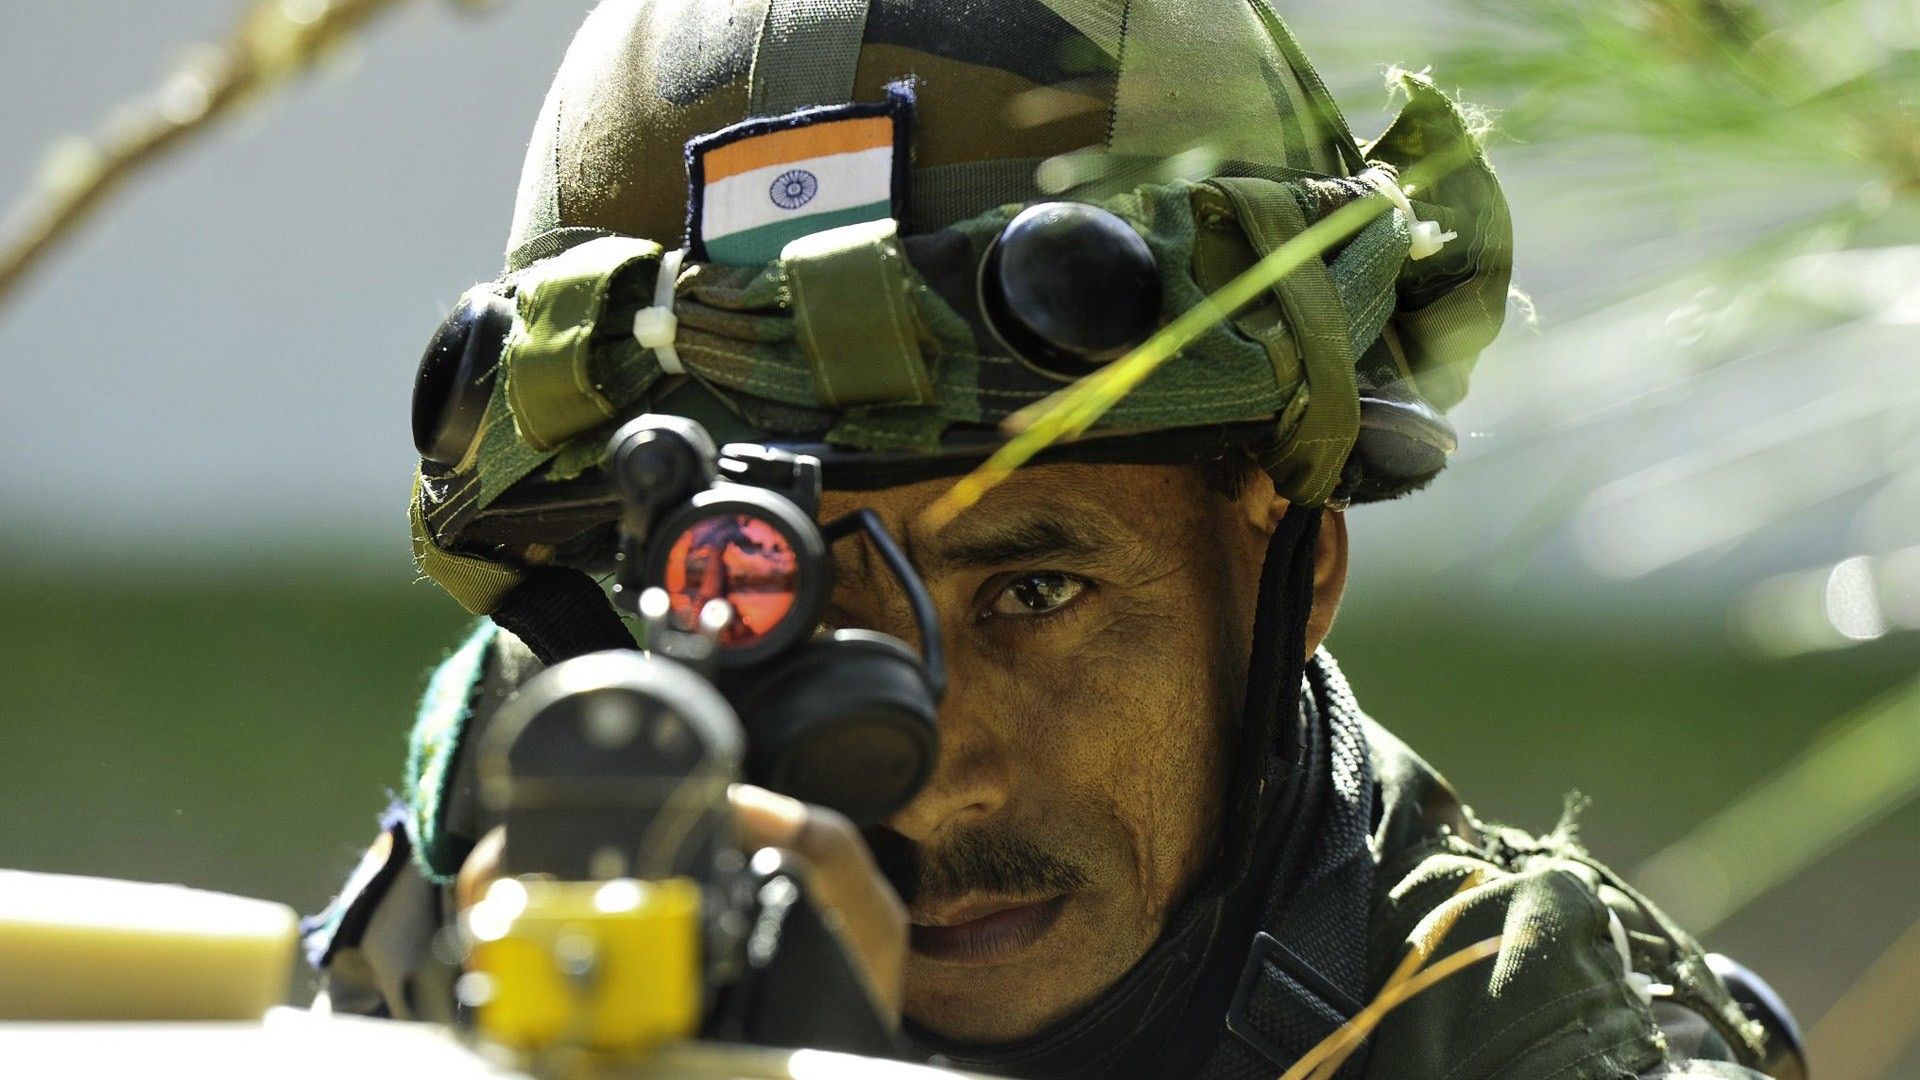 29,000+ Indian Army Pictures